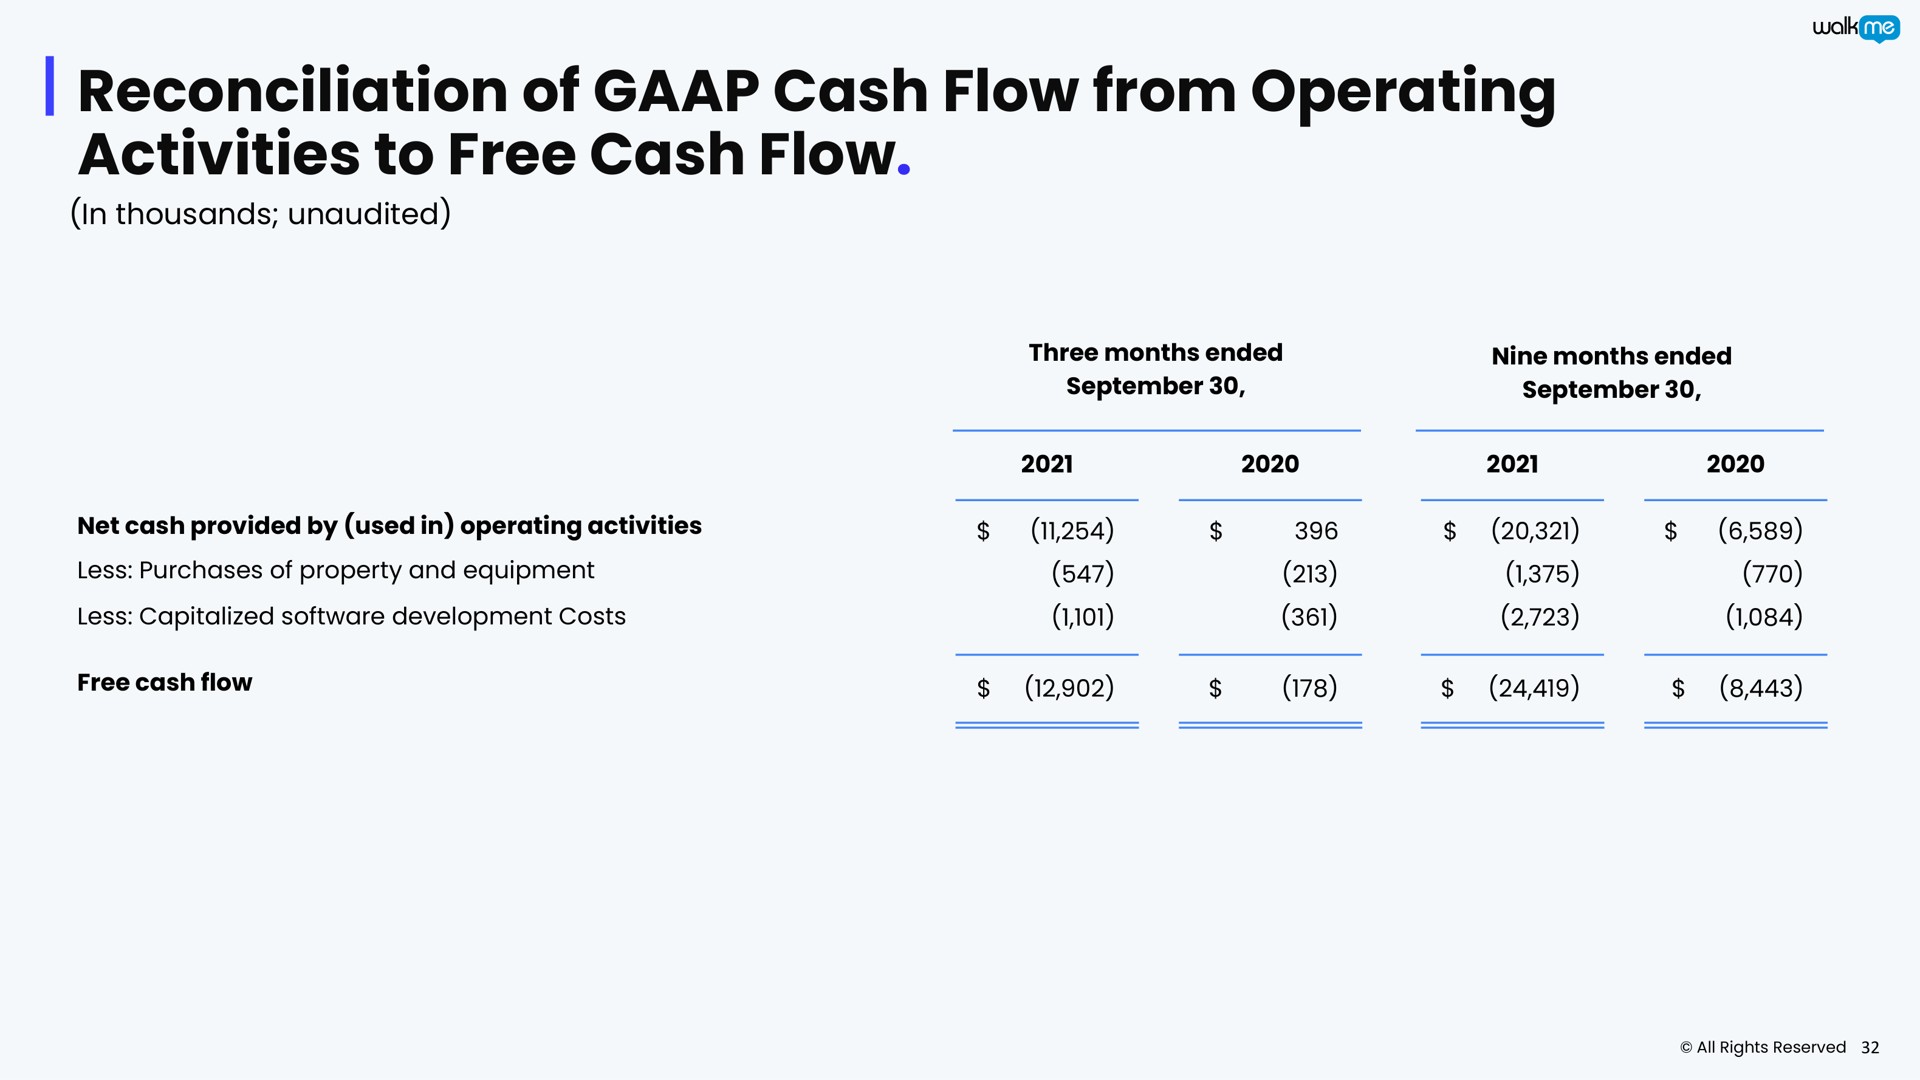 reconciliation of cash flow from operating activities to free cash flow | Walkme